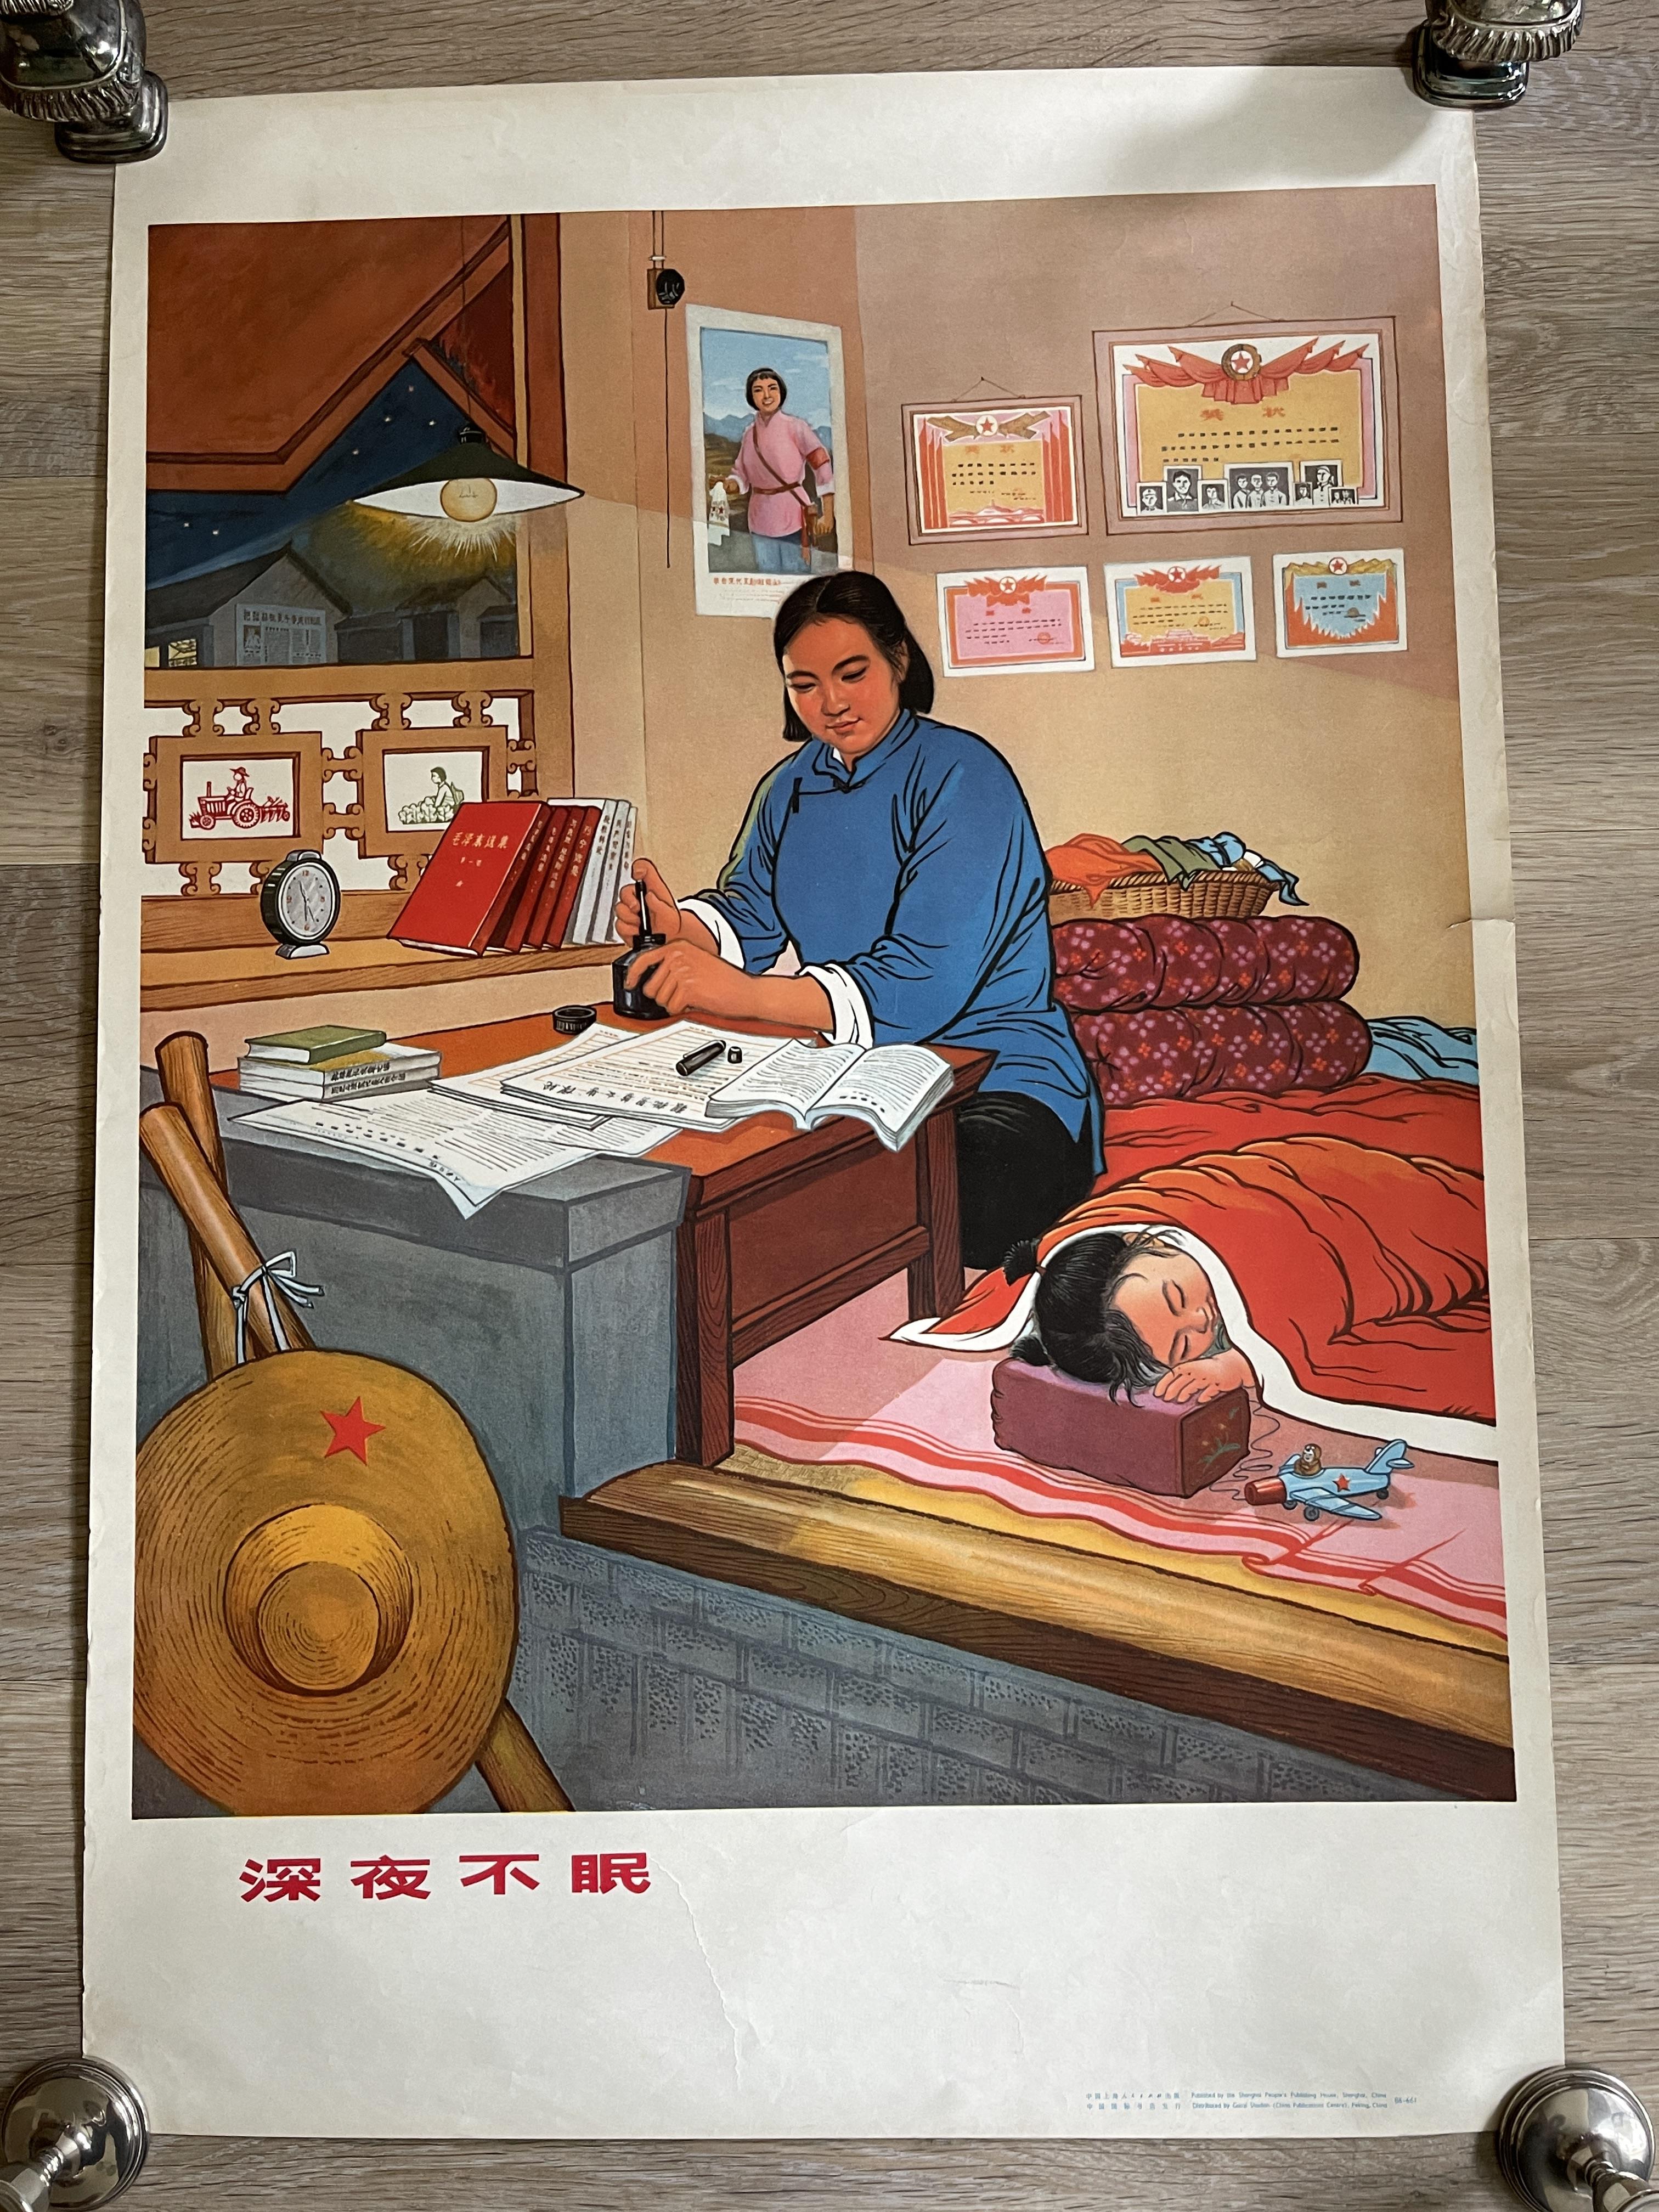 Awake in the Middle of the Night - Original Vintage Chinese Poster - Image 7 of 7